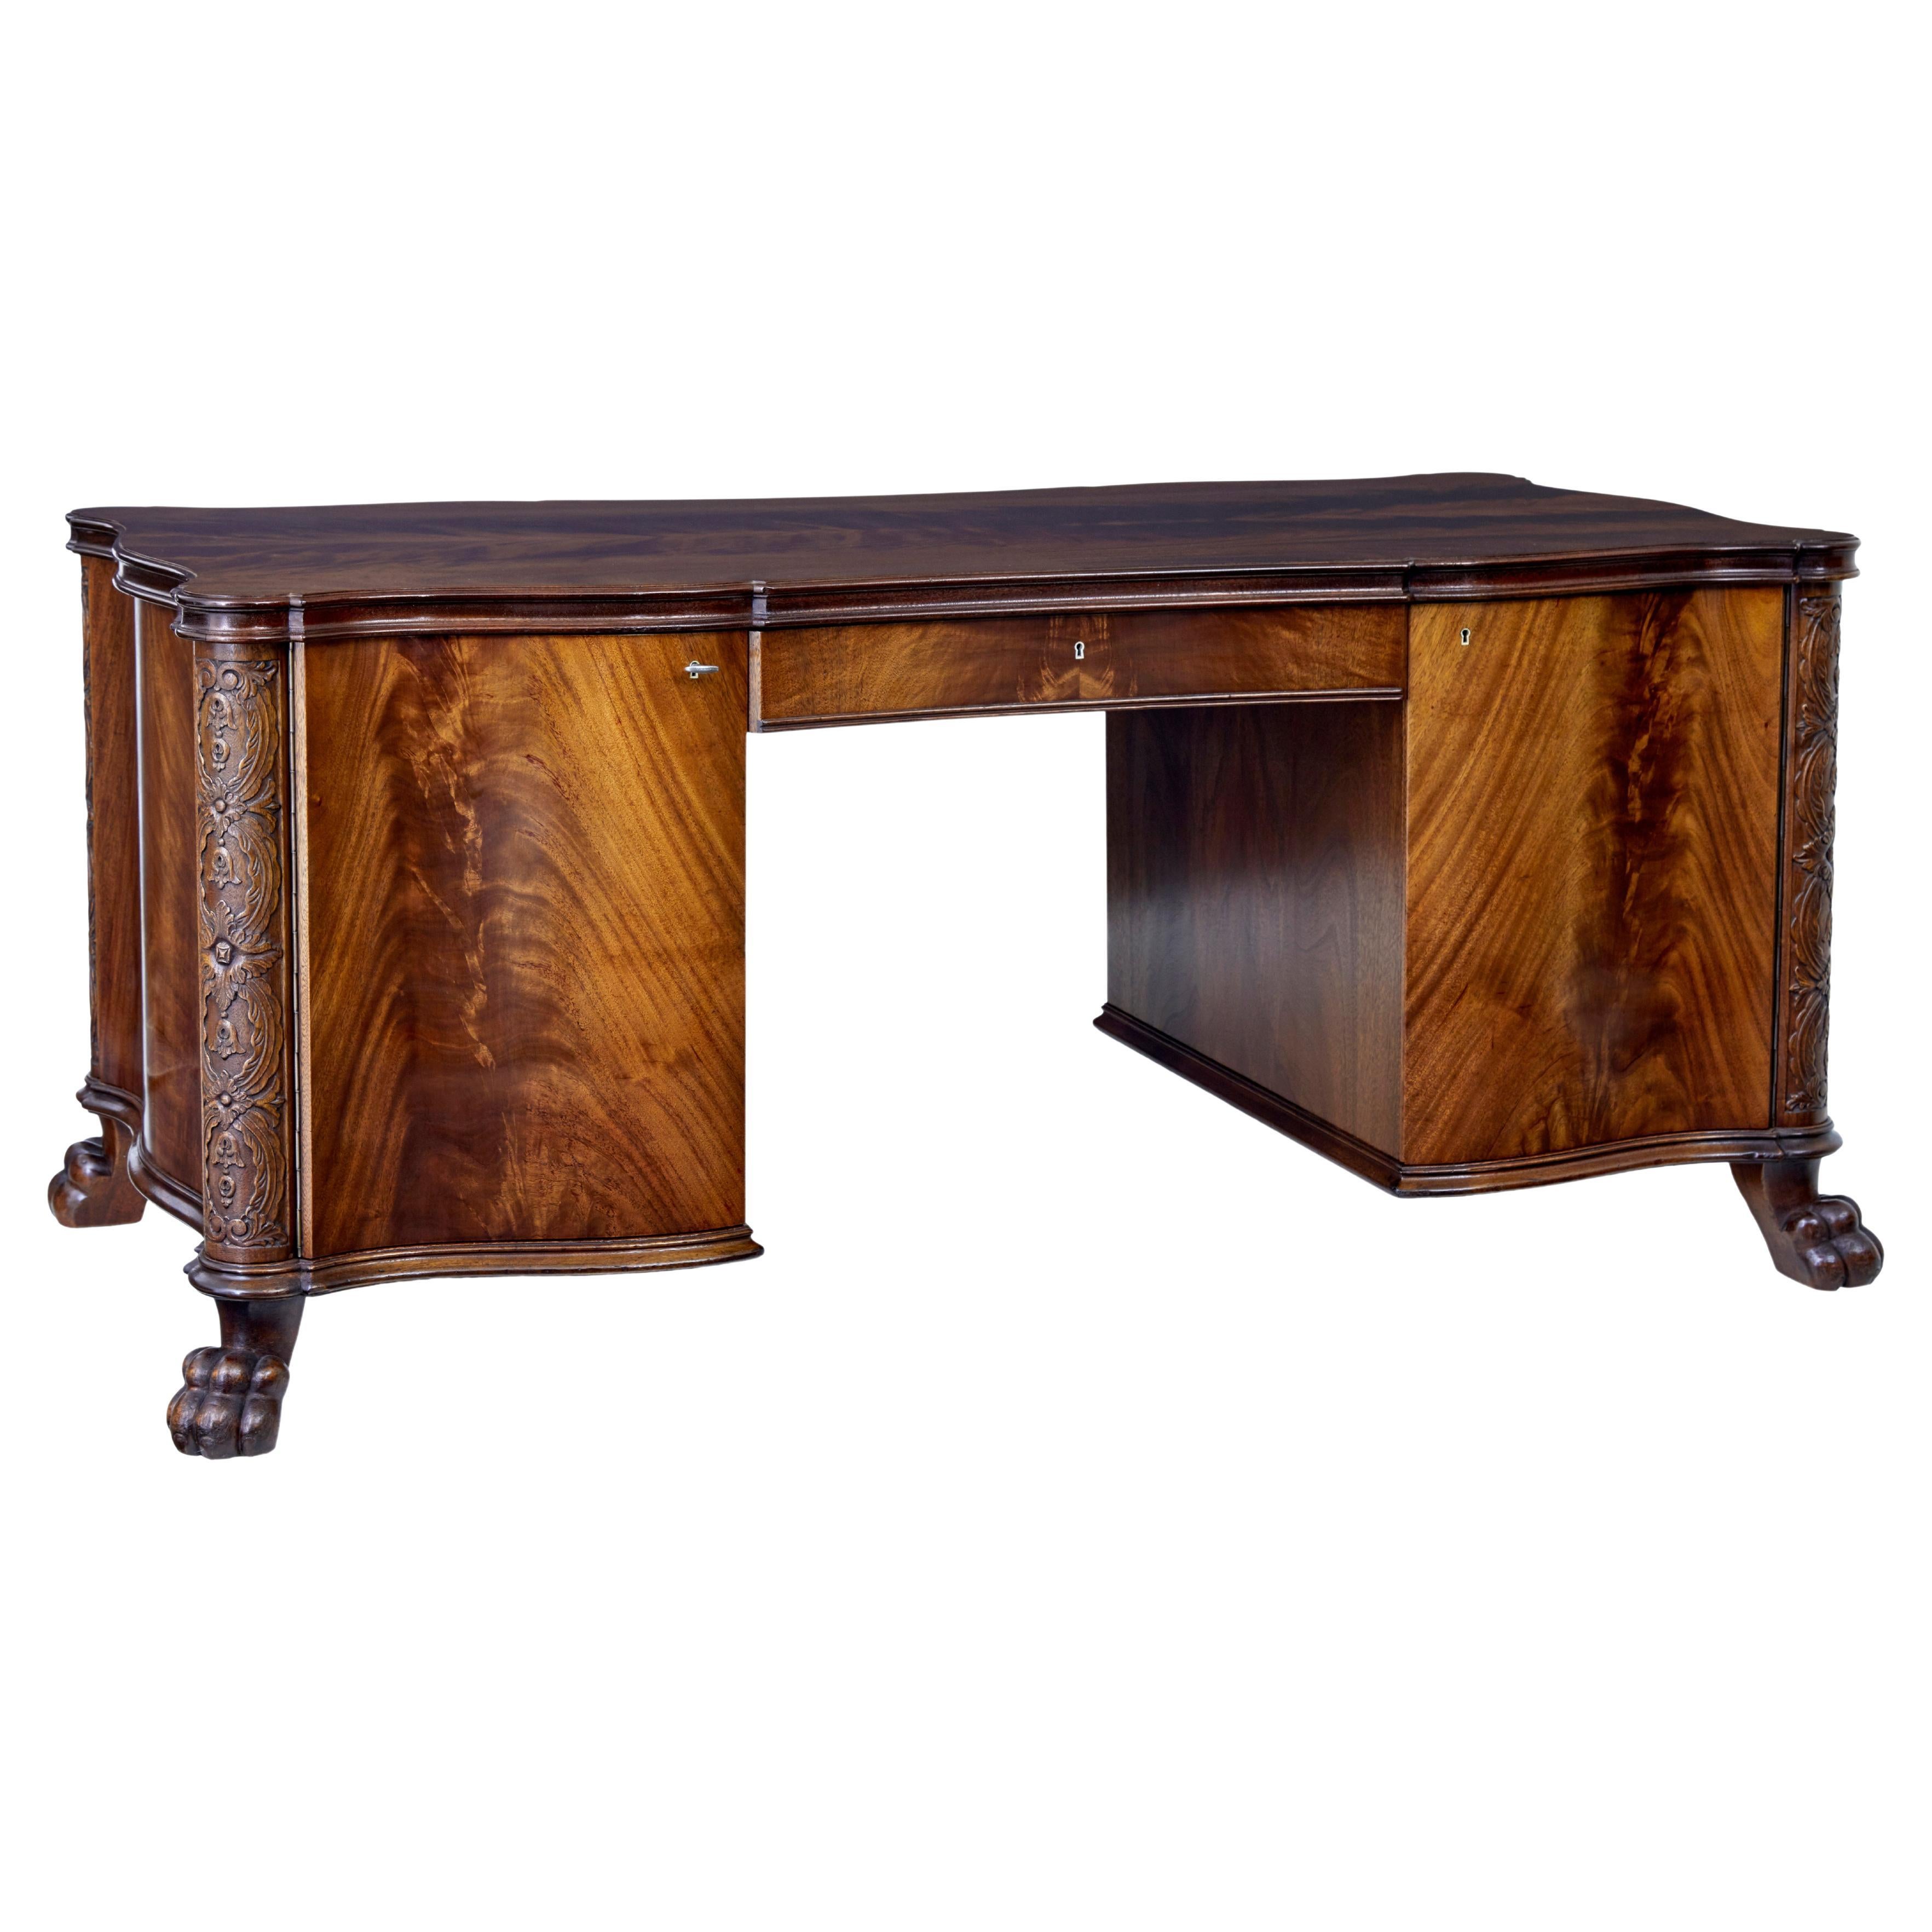 Mid-20th Century Mahogany Desk in the English Style at 1stDibs